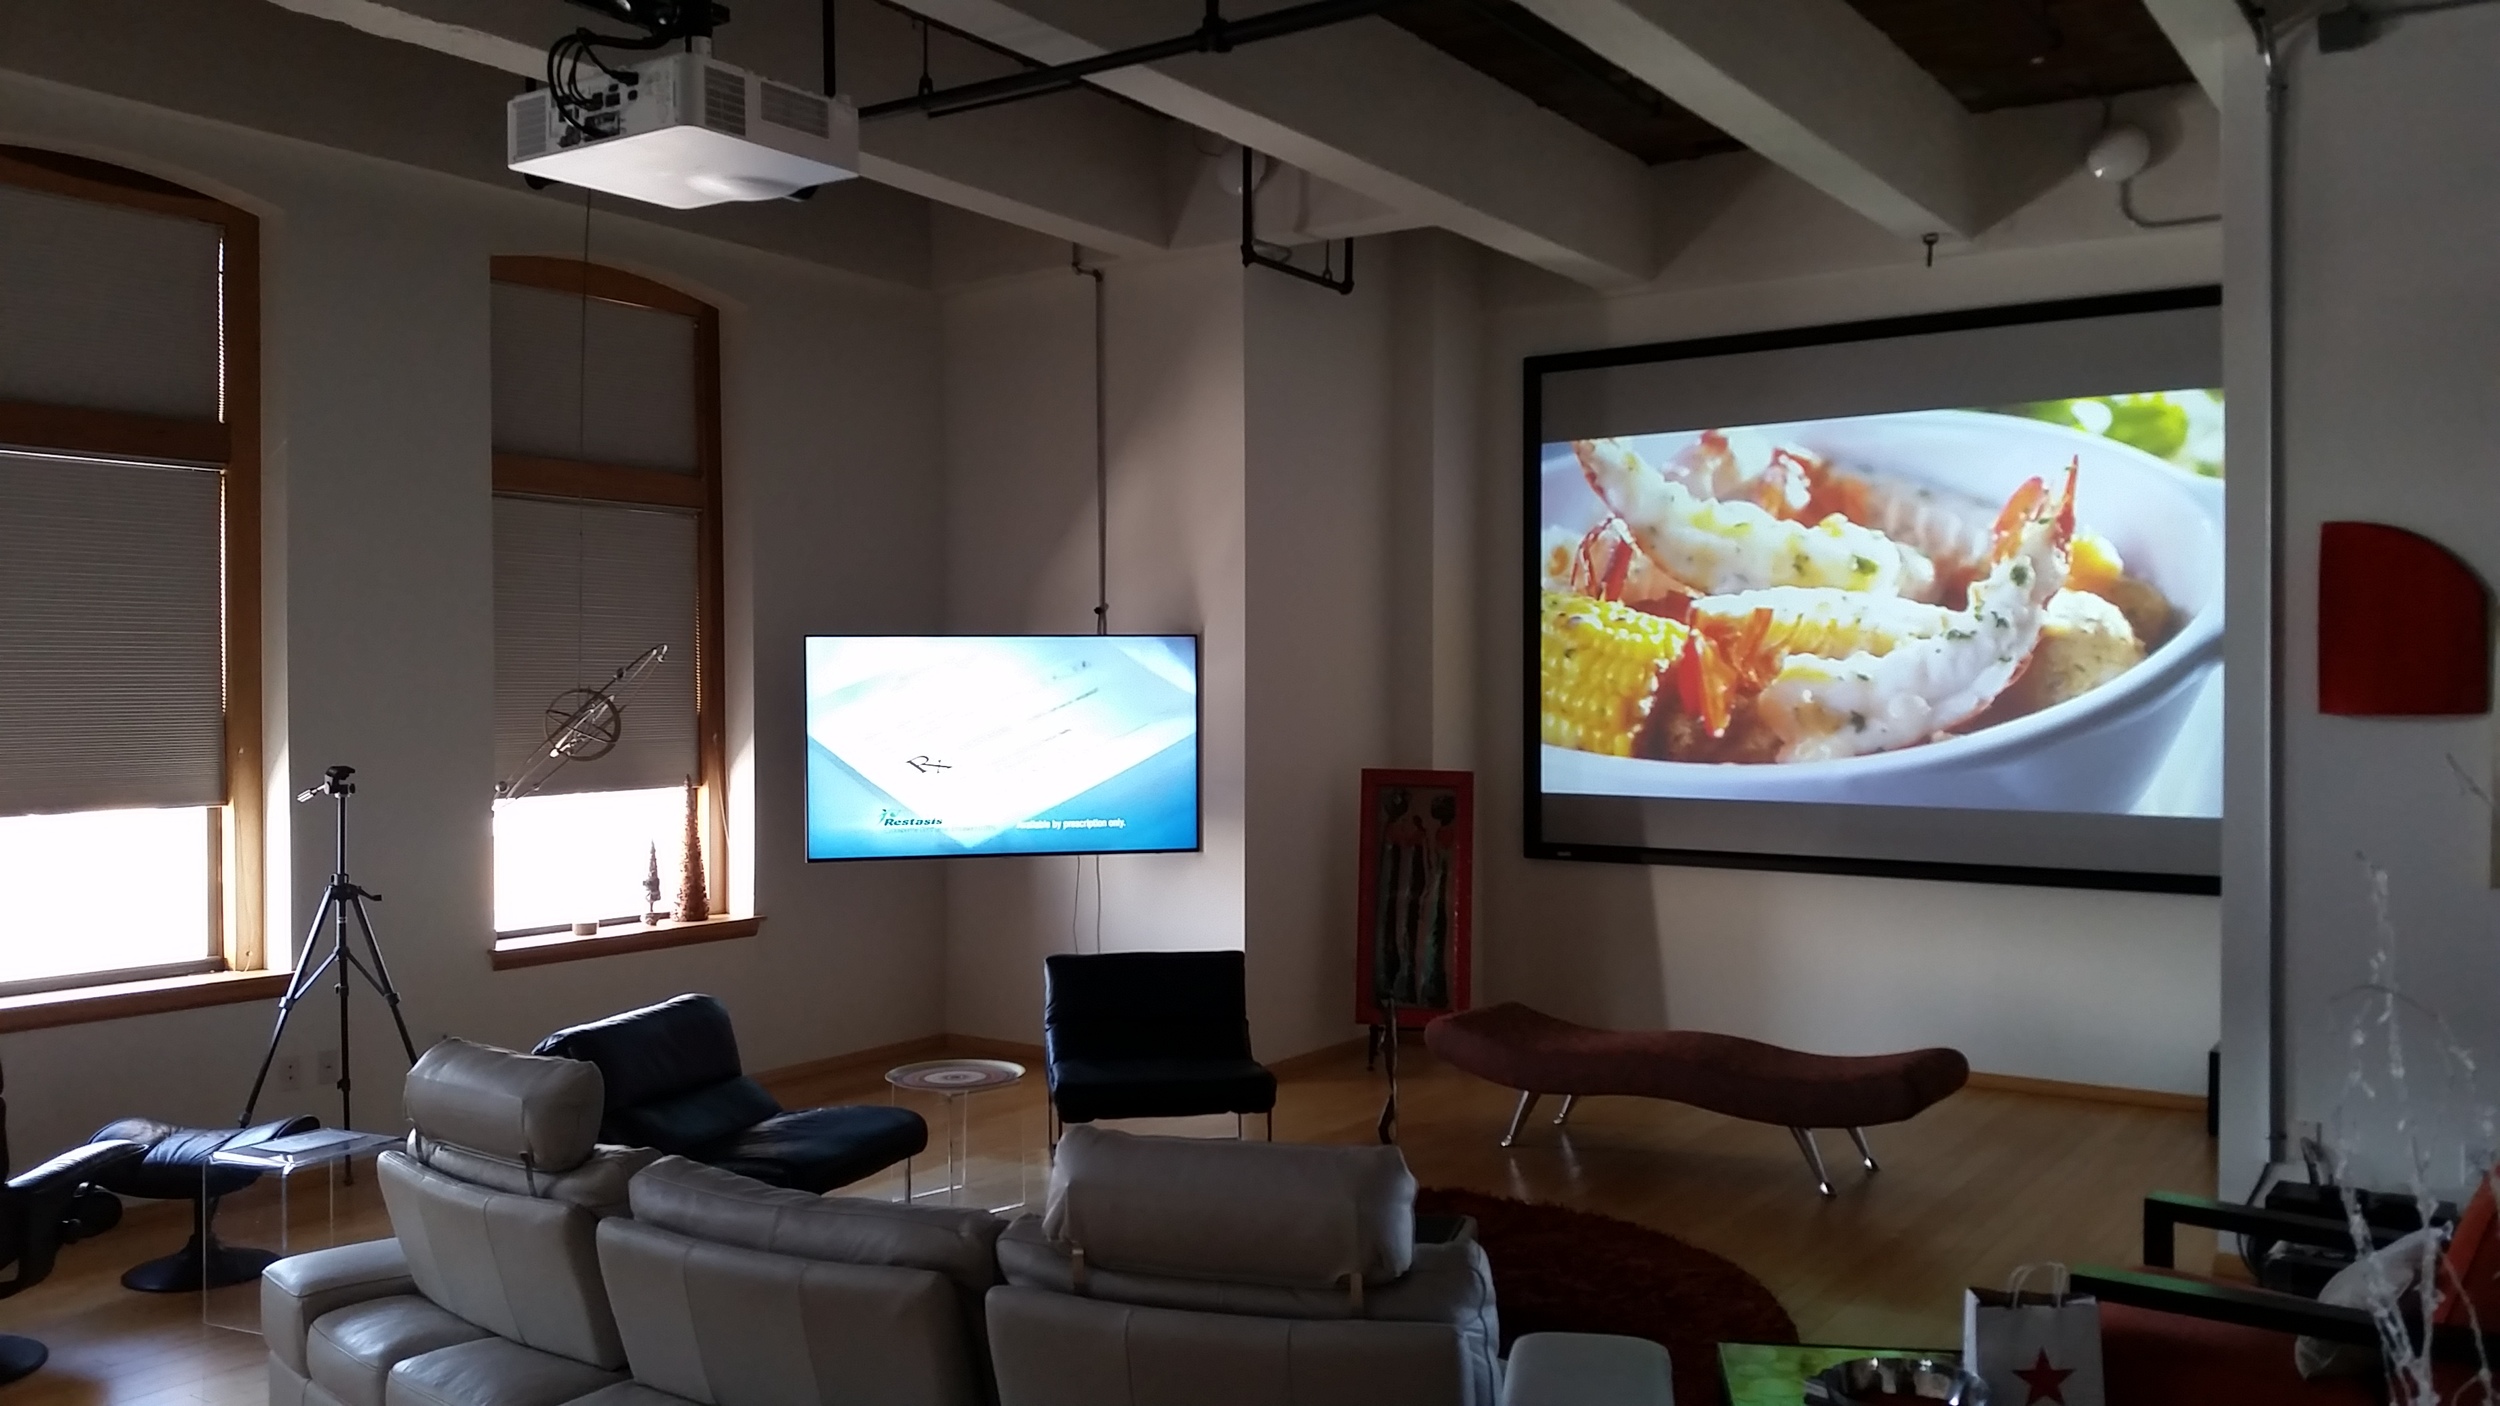 150" HD projection system